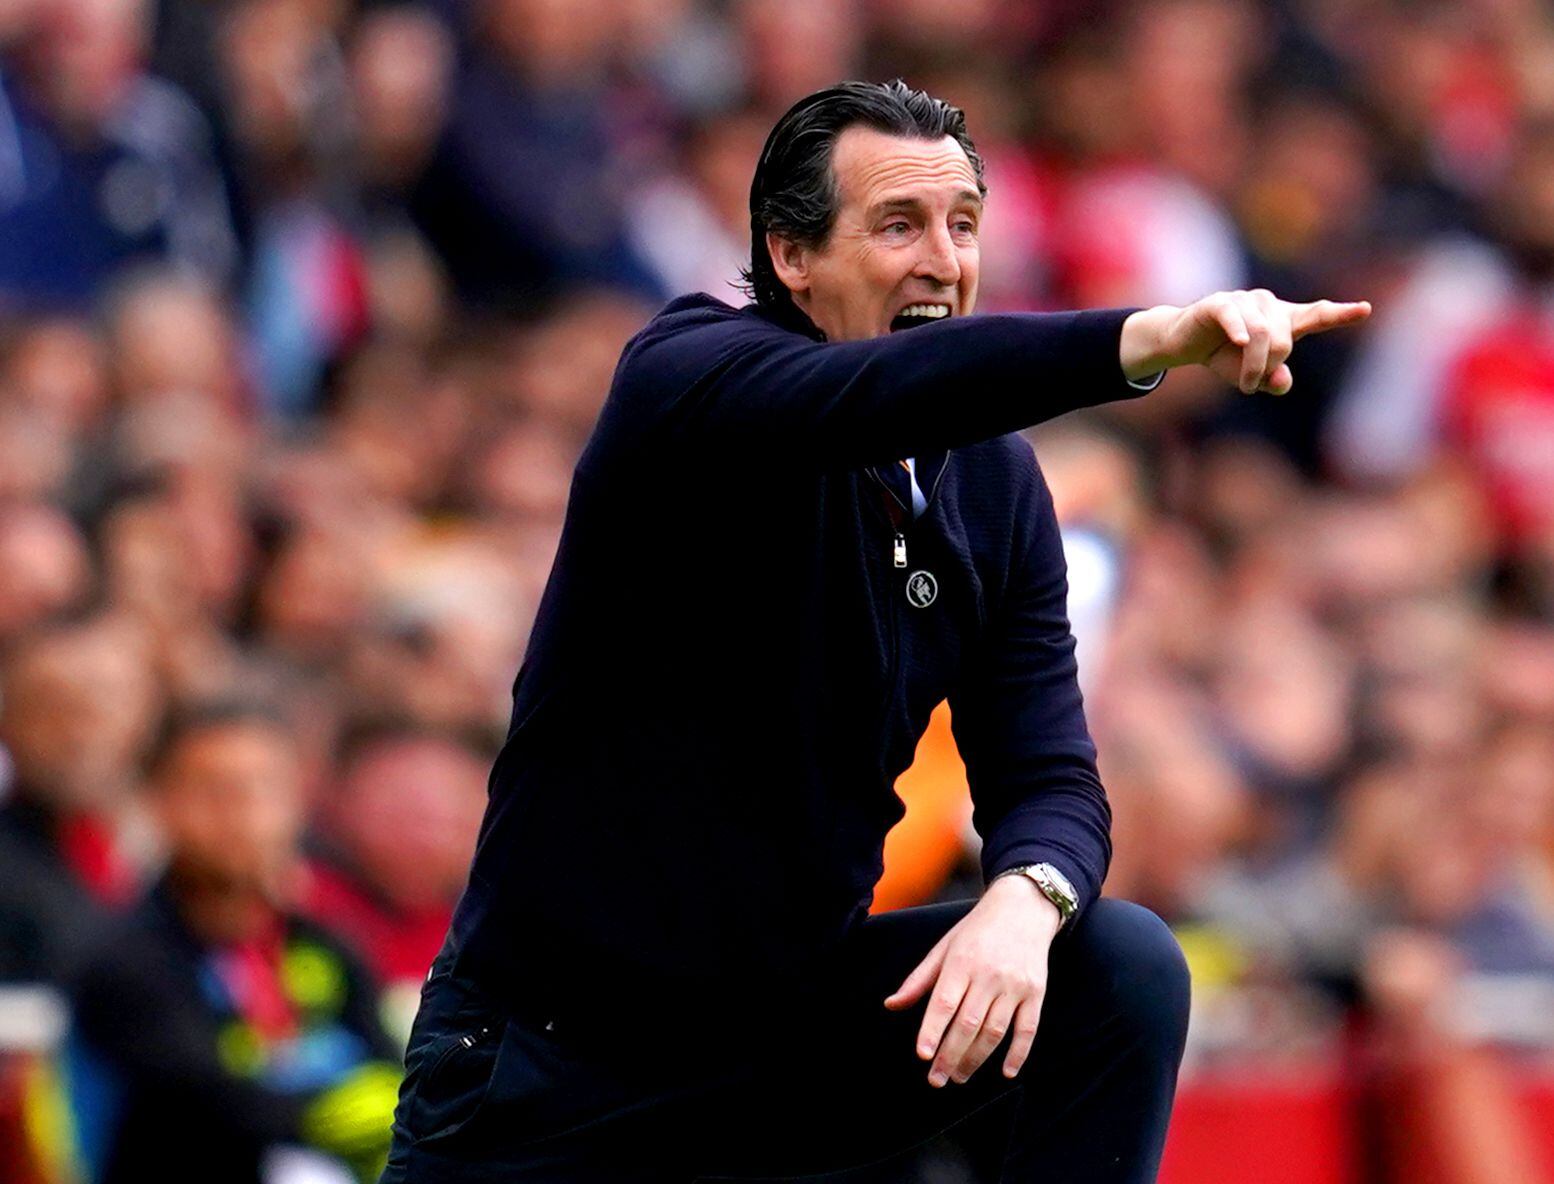 Unai Emery nominated for Premier League manager of the season
